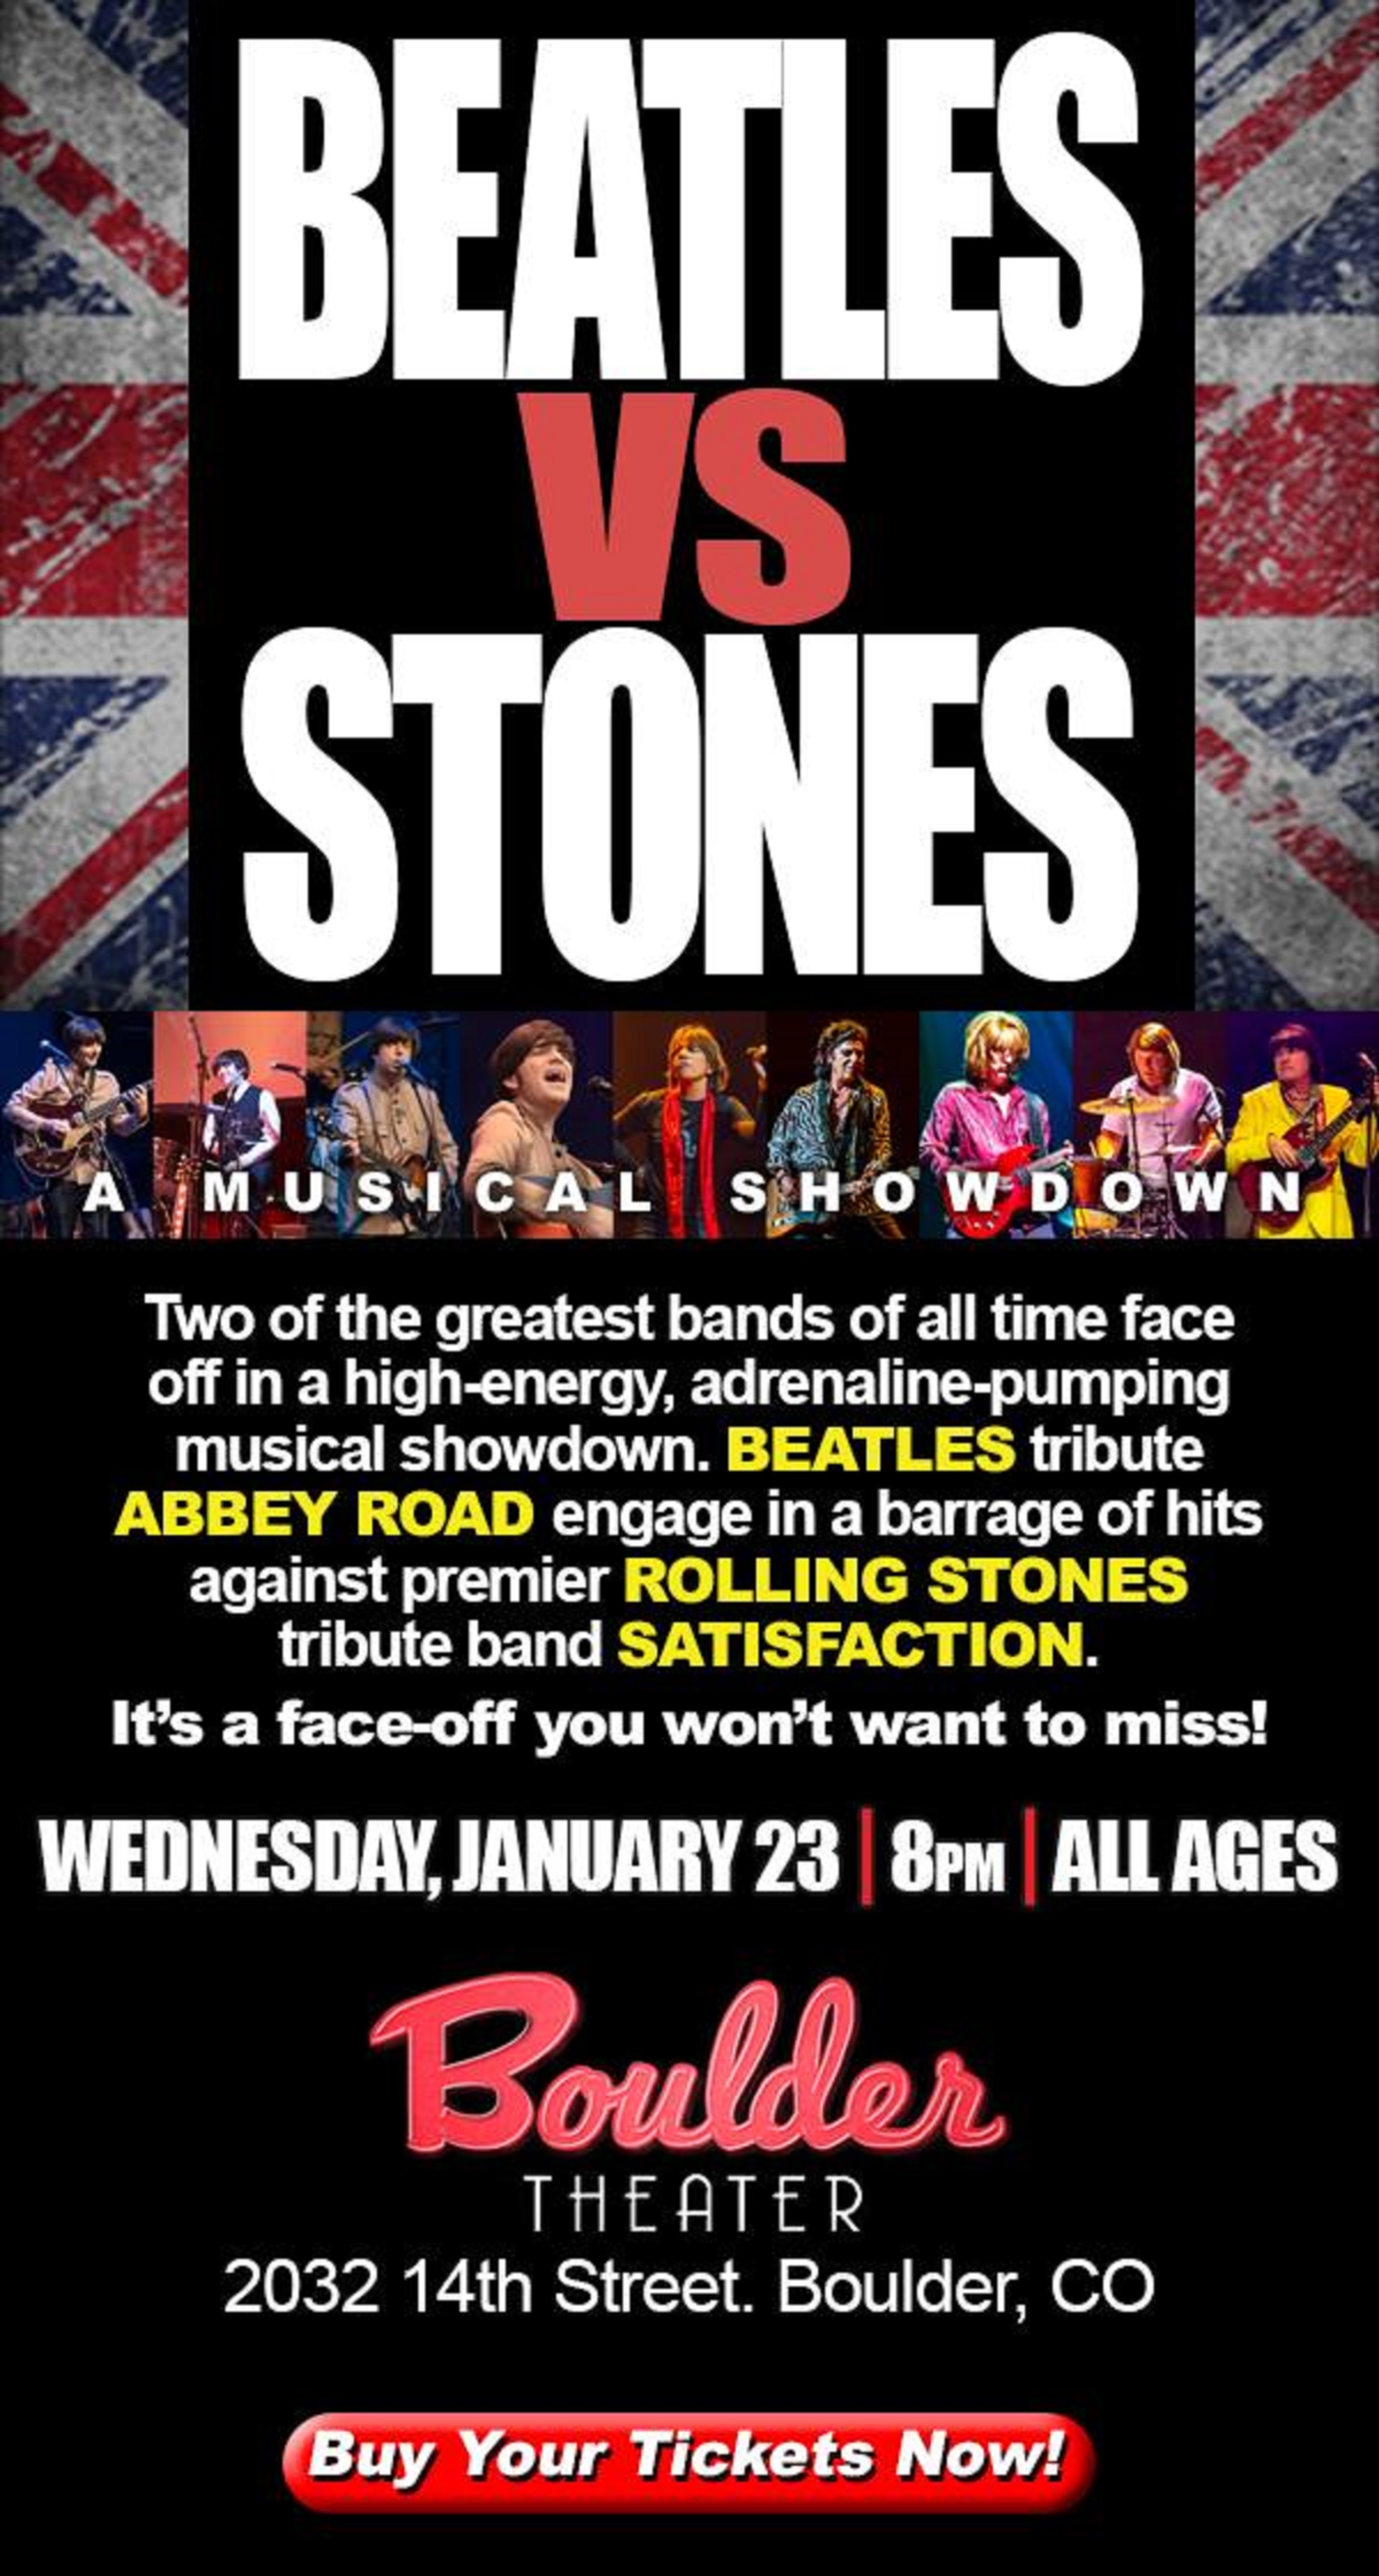 Beatles vs. Stones Show Offering Free Tickets to Federal Employees